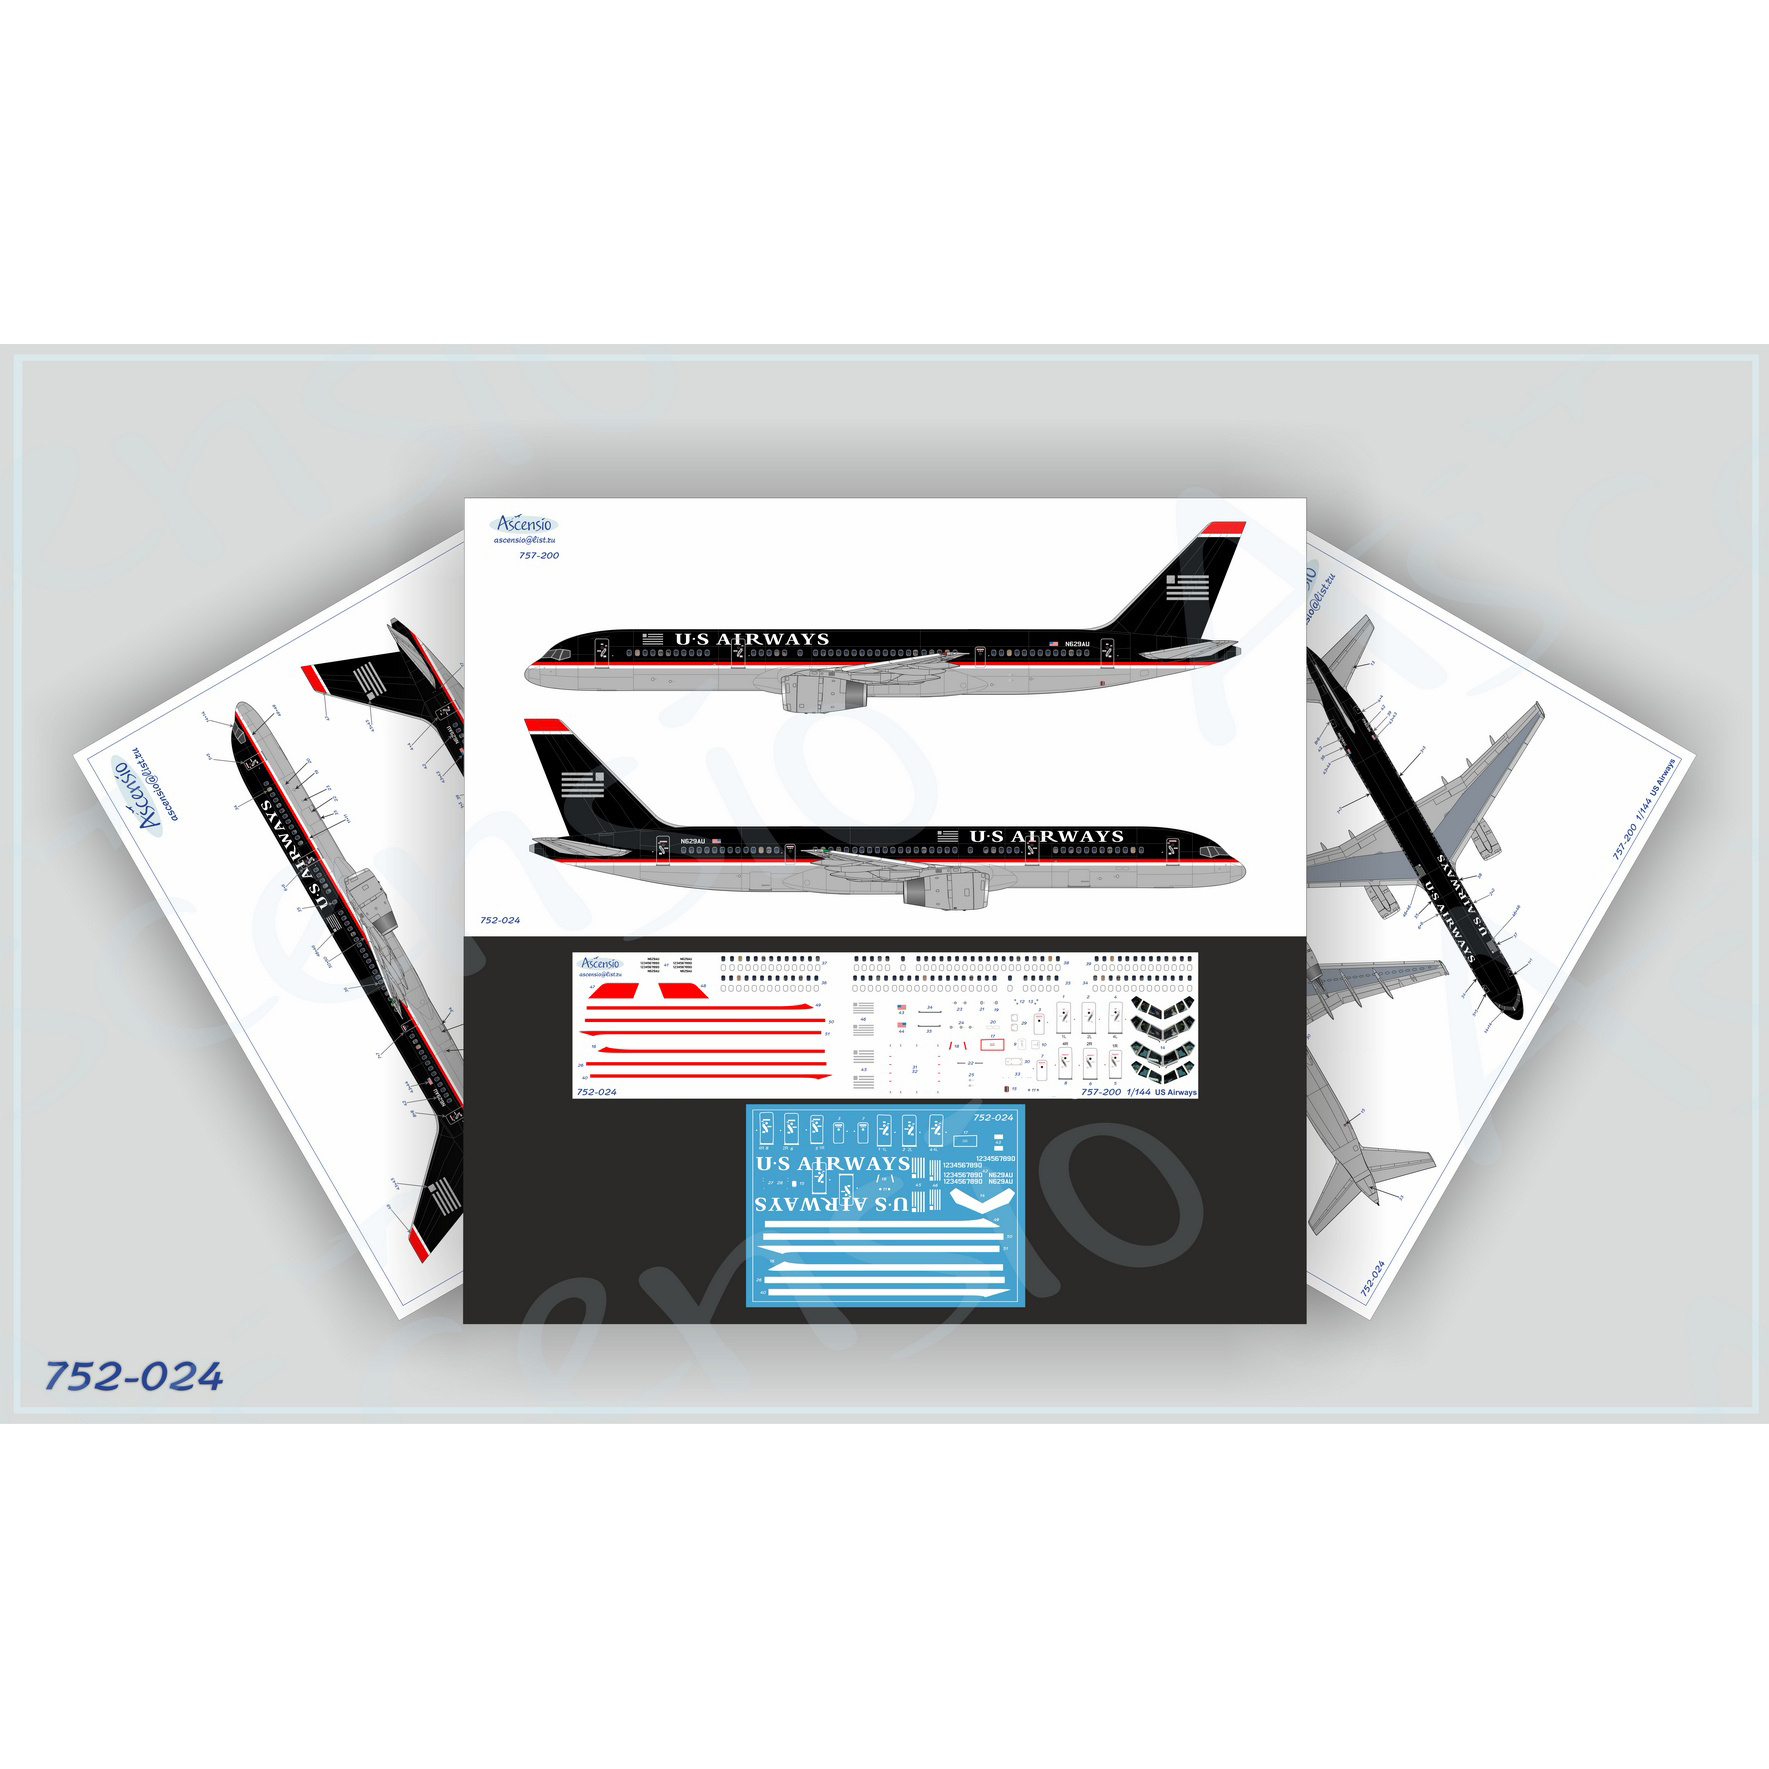 752-024 Ascensio 1/144 Decal for 757-200, US Airways